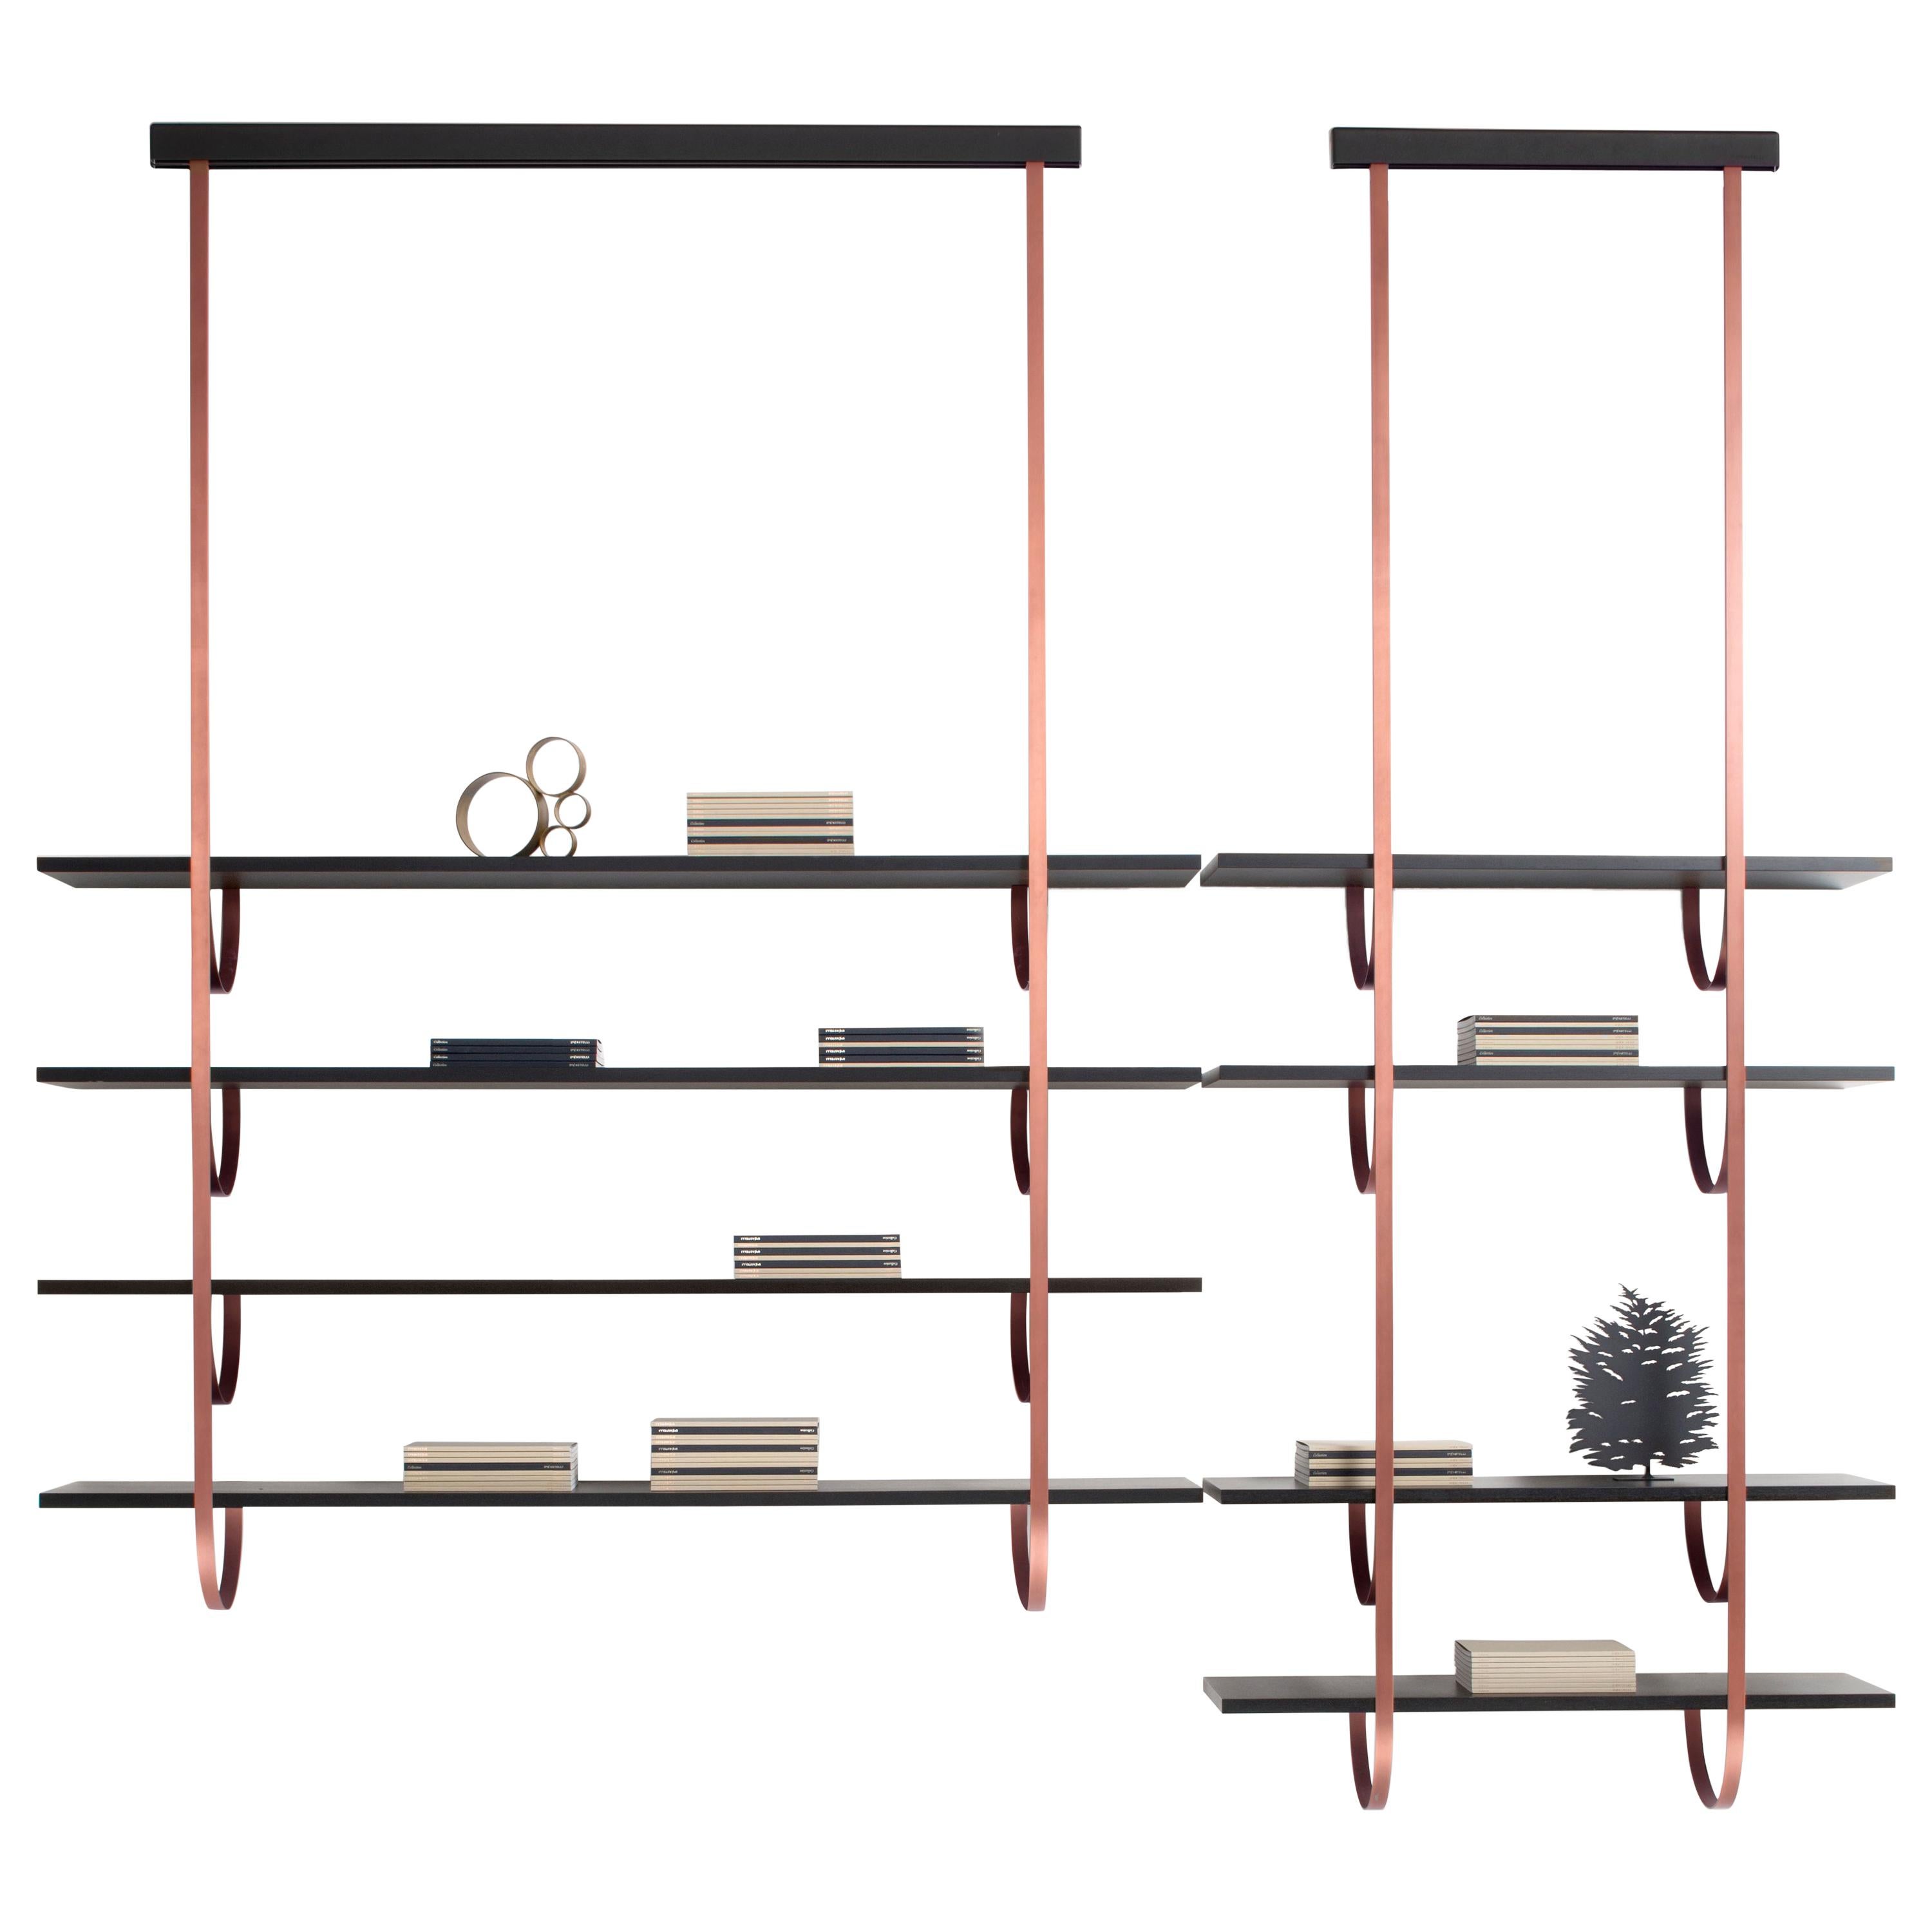 DeCastelli Talea 185 Bookshelf in Copper with 4 Wooden Shelves by LucidiPevere